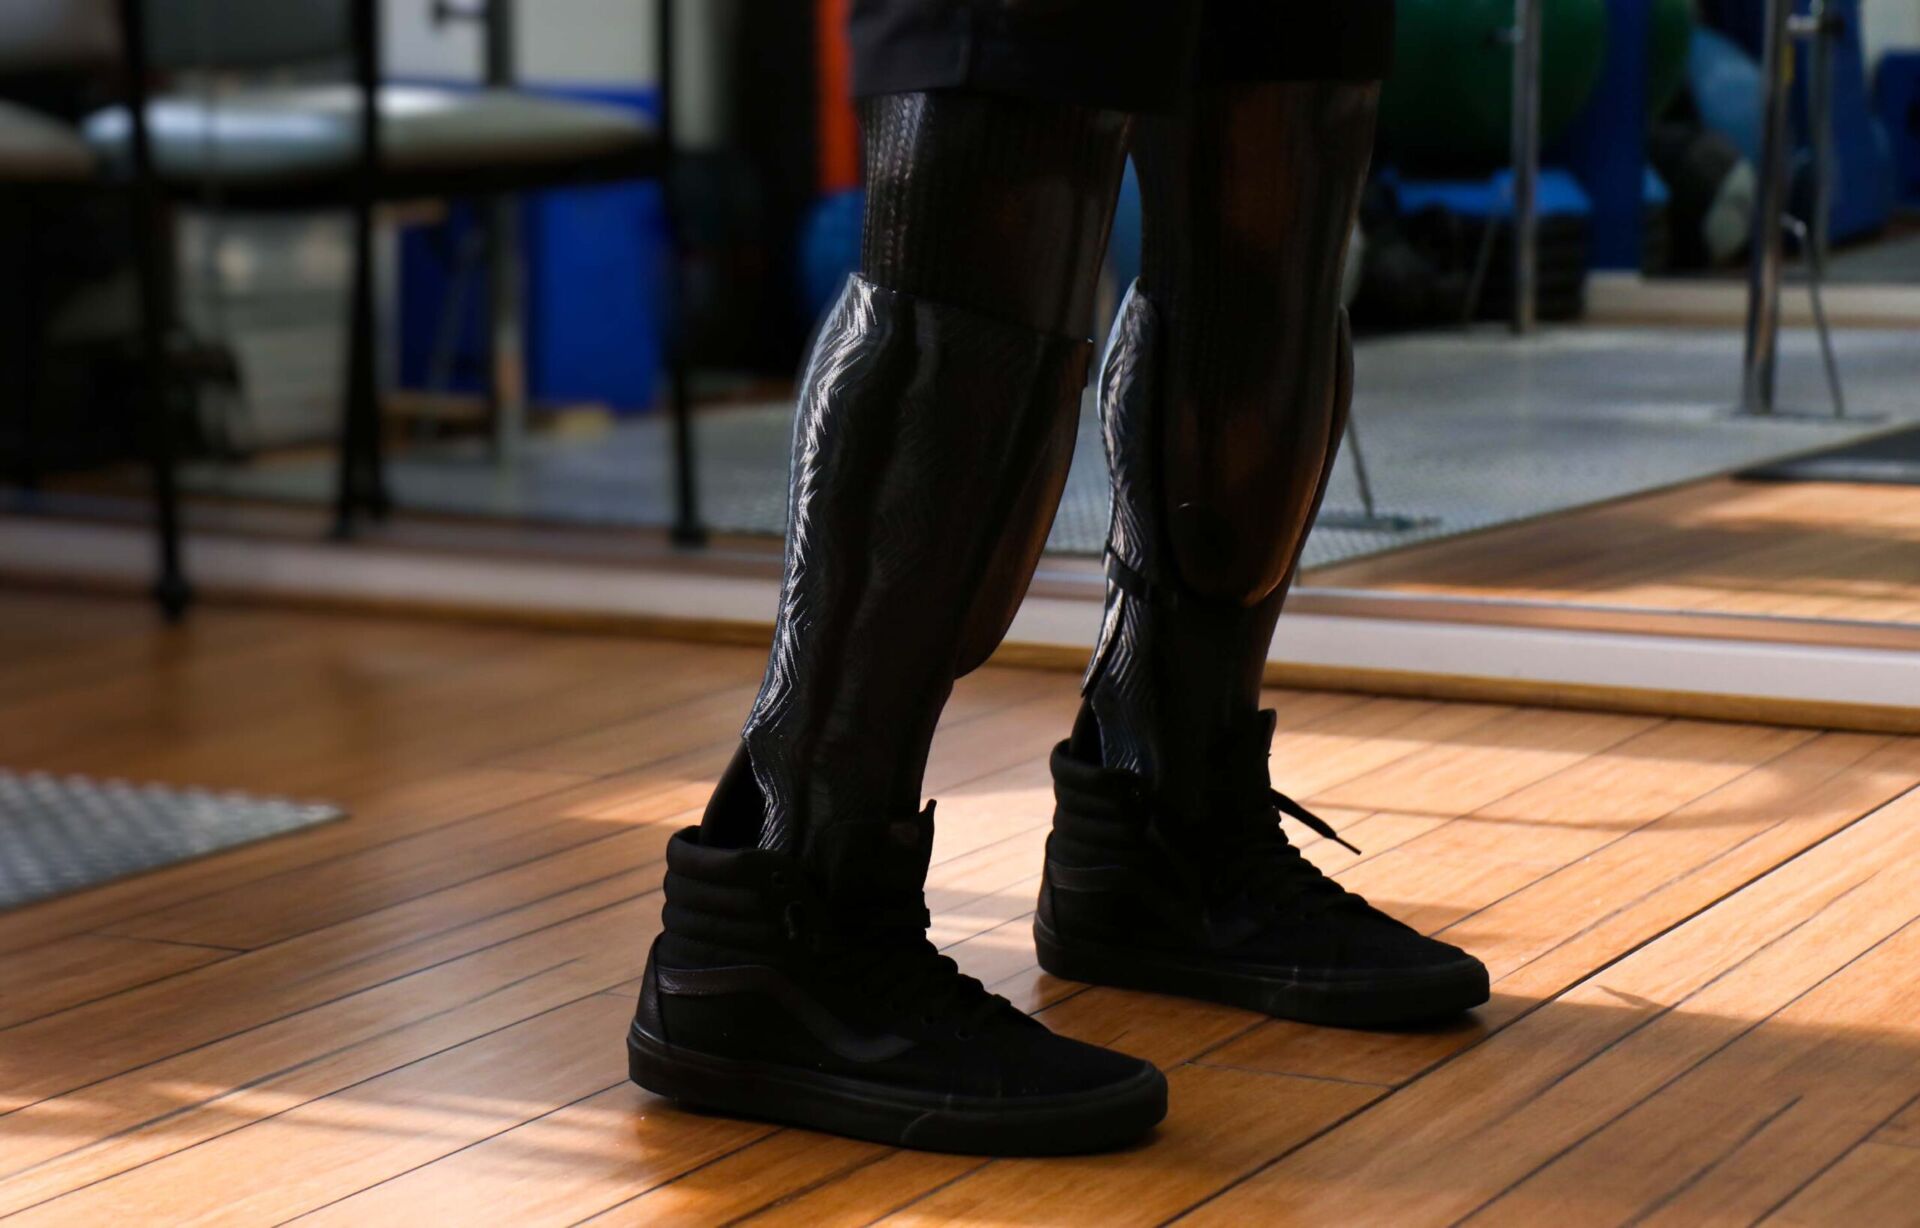 3d printed prosthesis covers for prosthetic legs